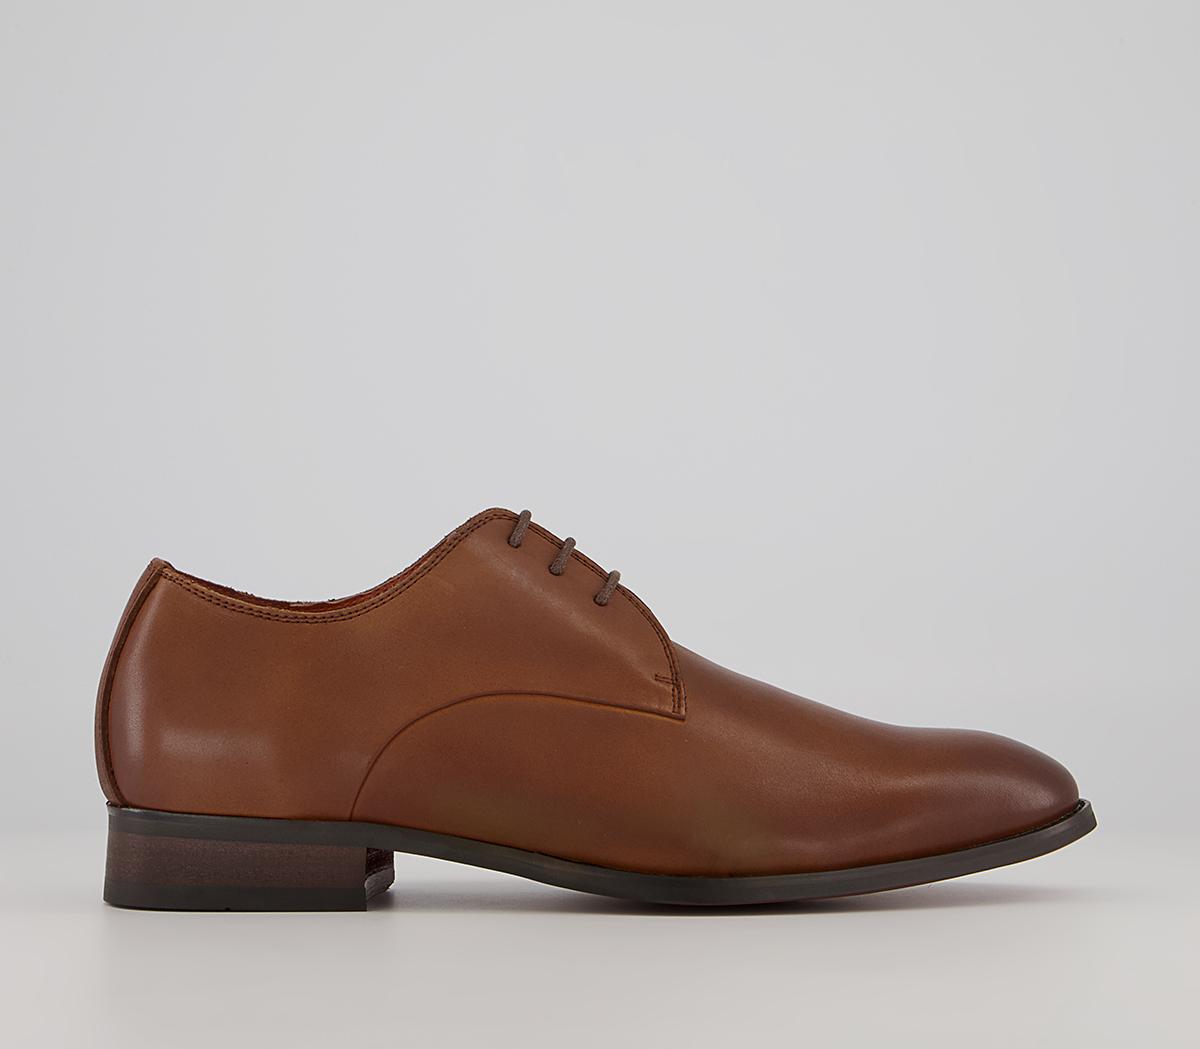 OfficeMiguel Three Eye Derby ShoesTan Leather